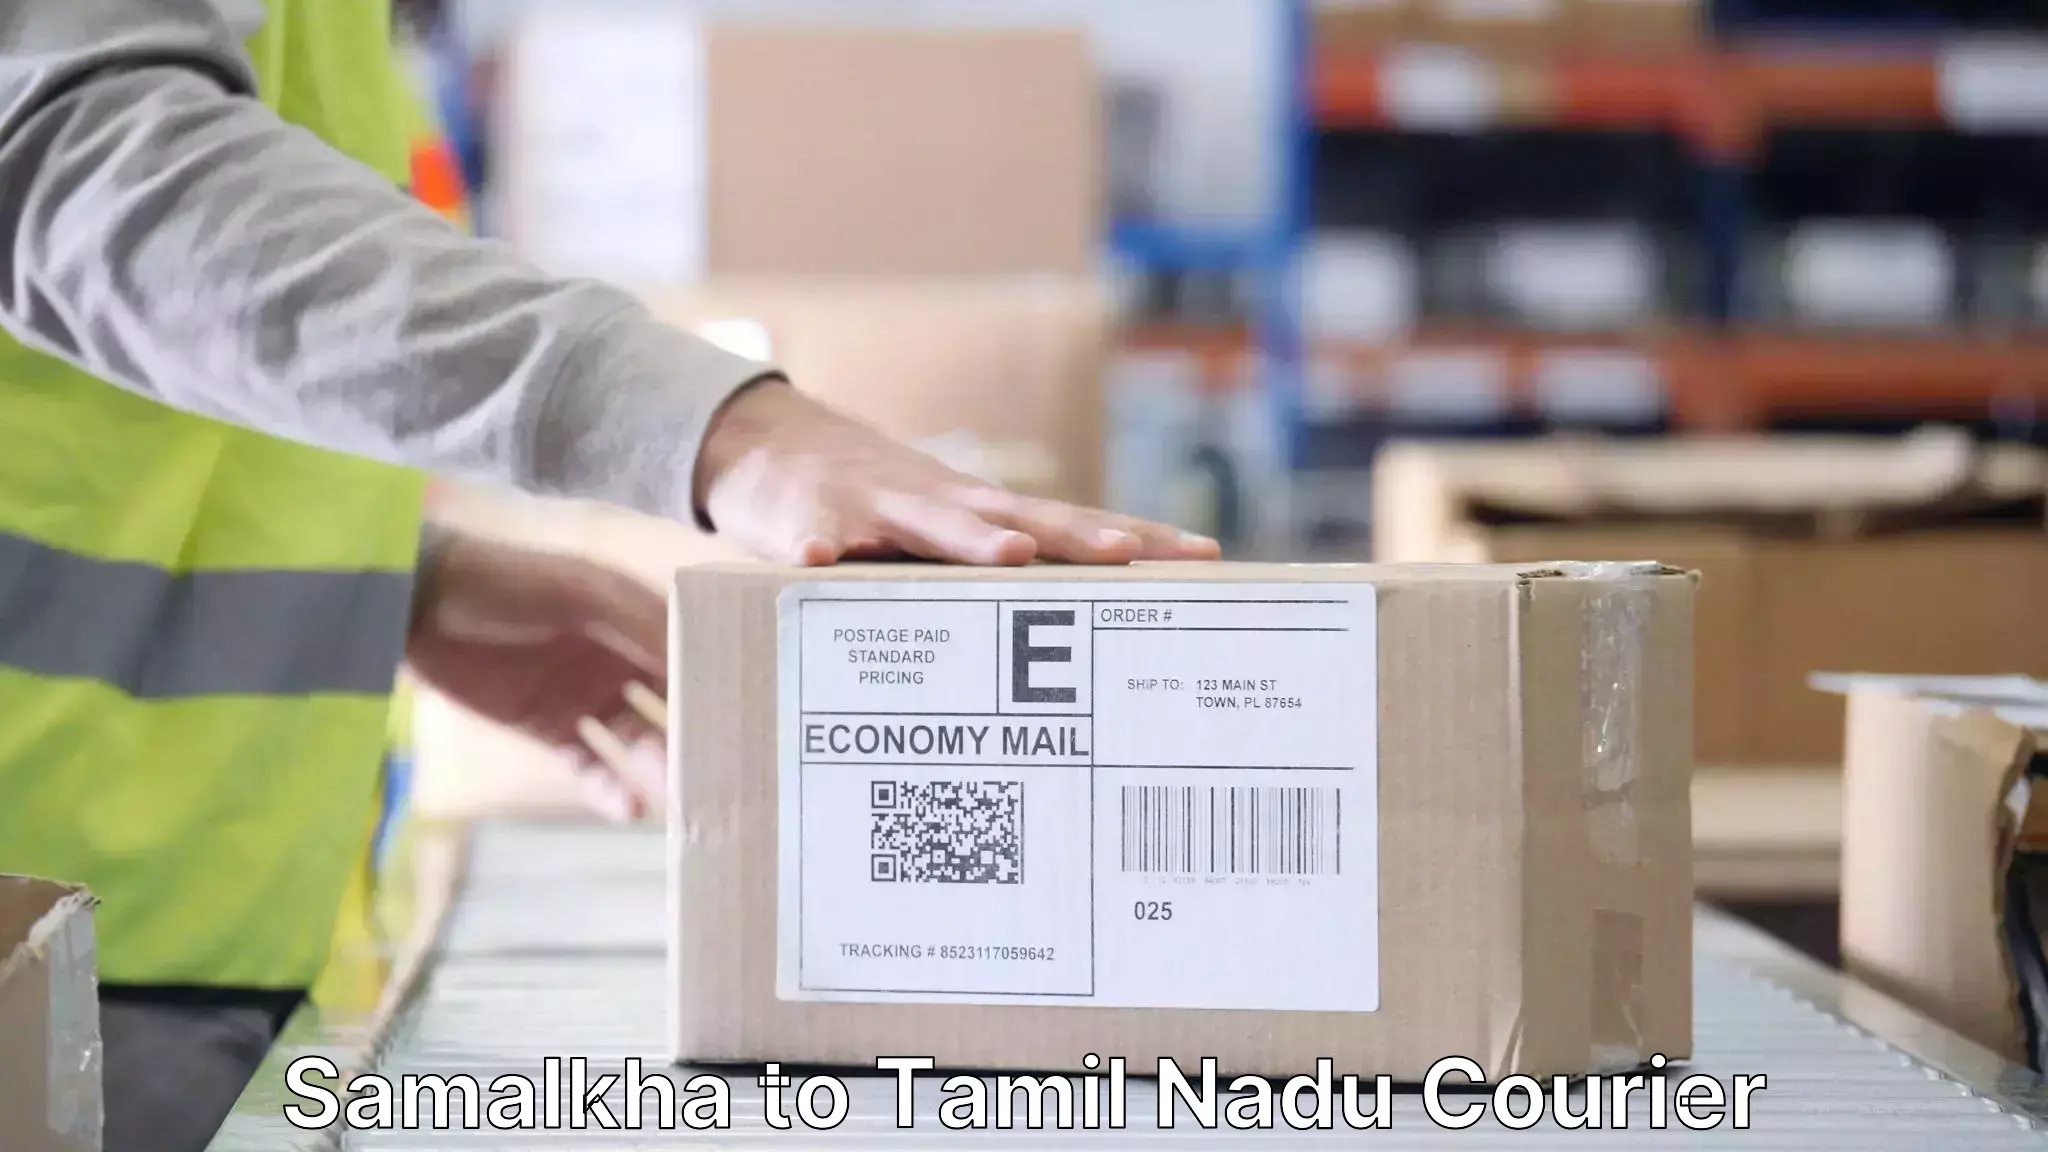 Furniture delivery service Samalkha to IIT Madras